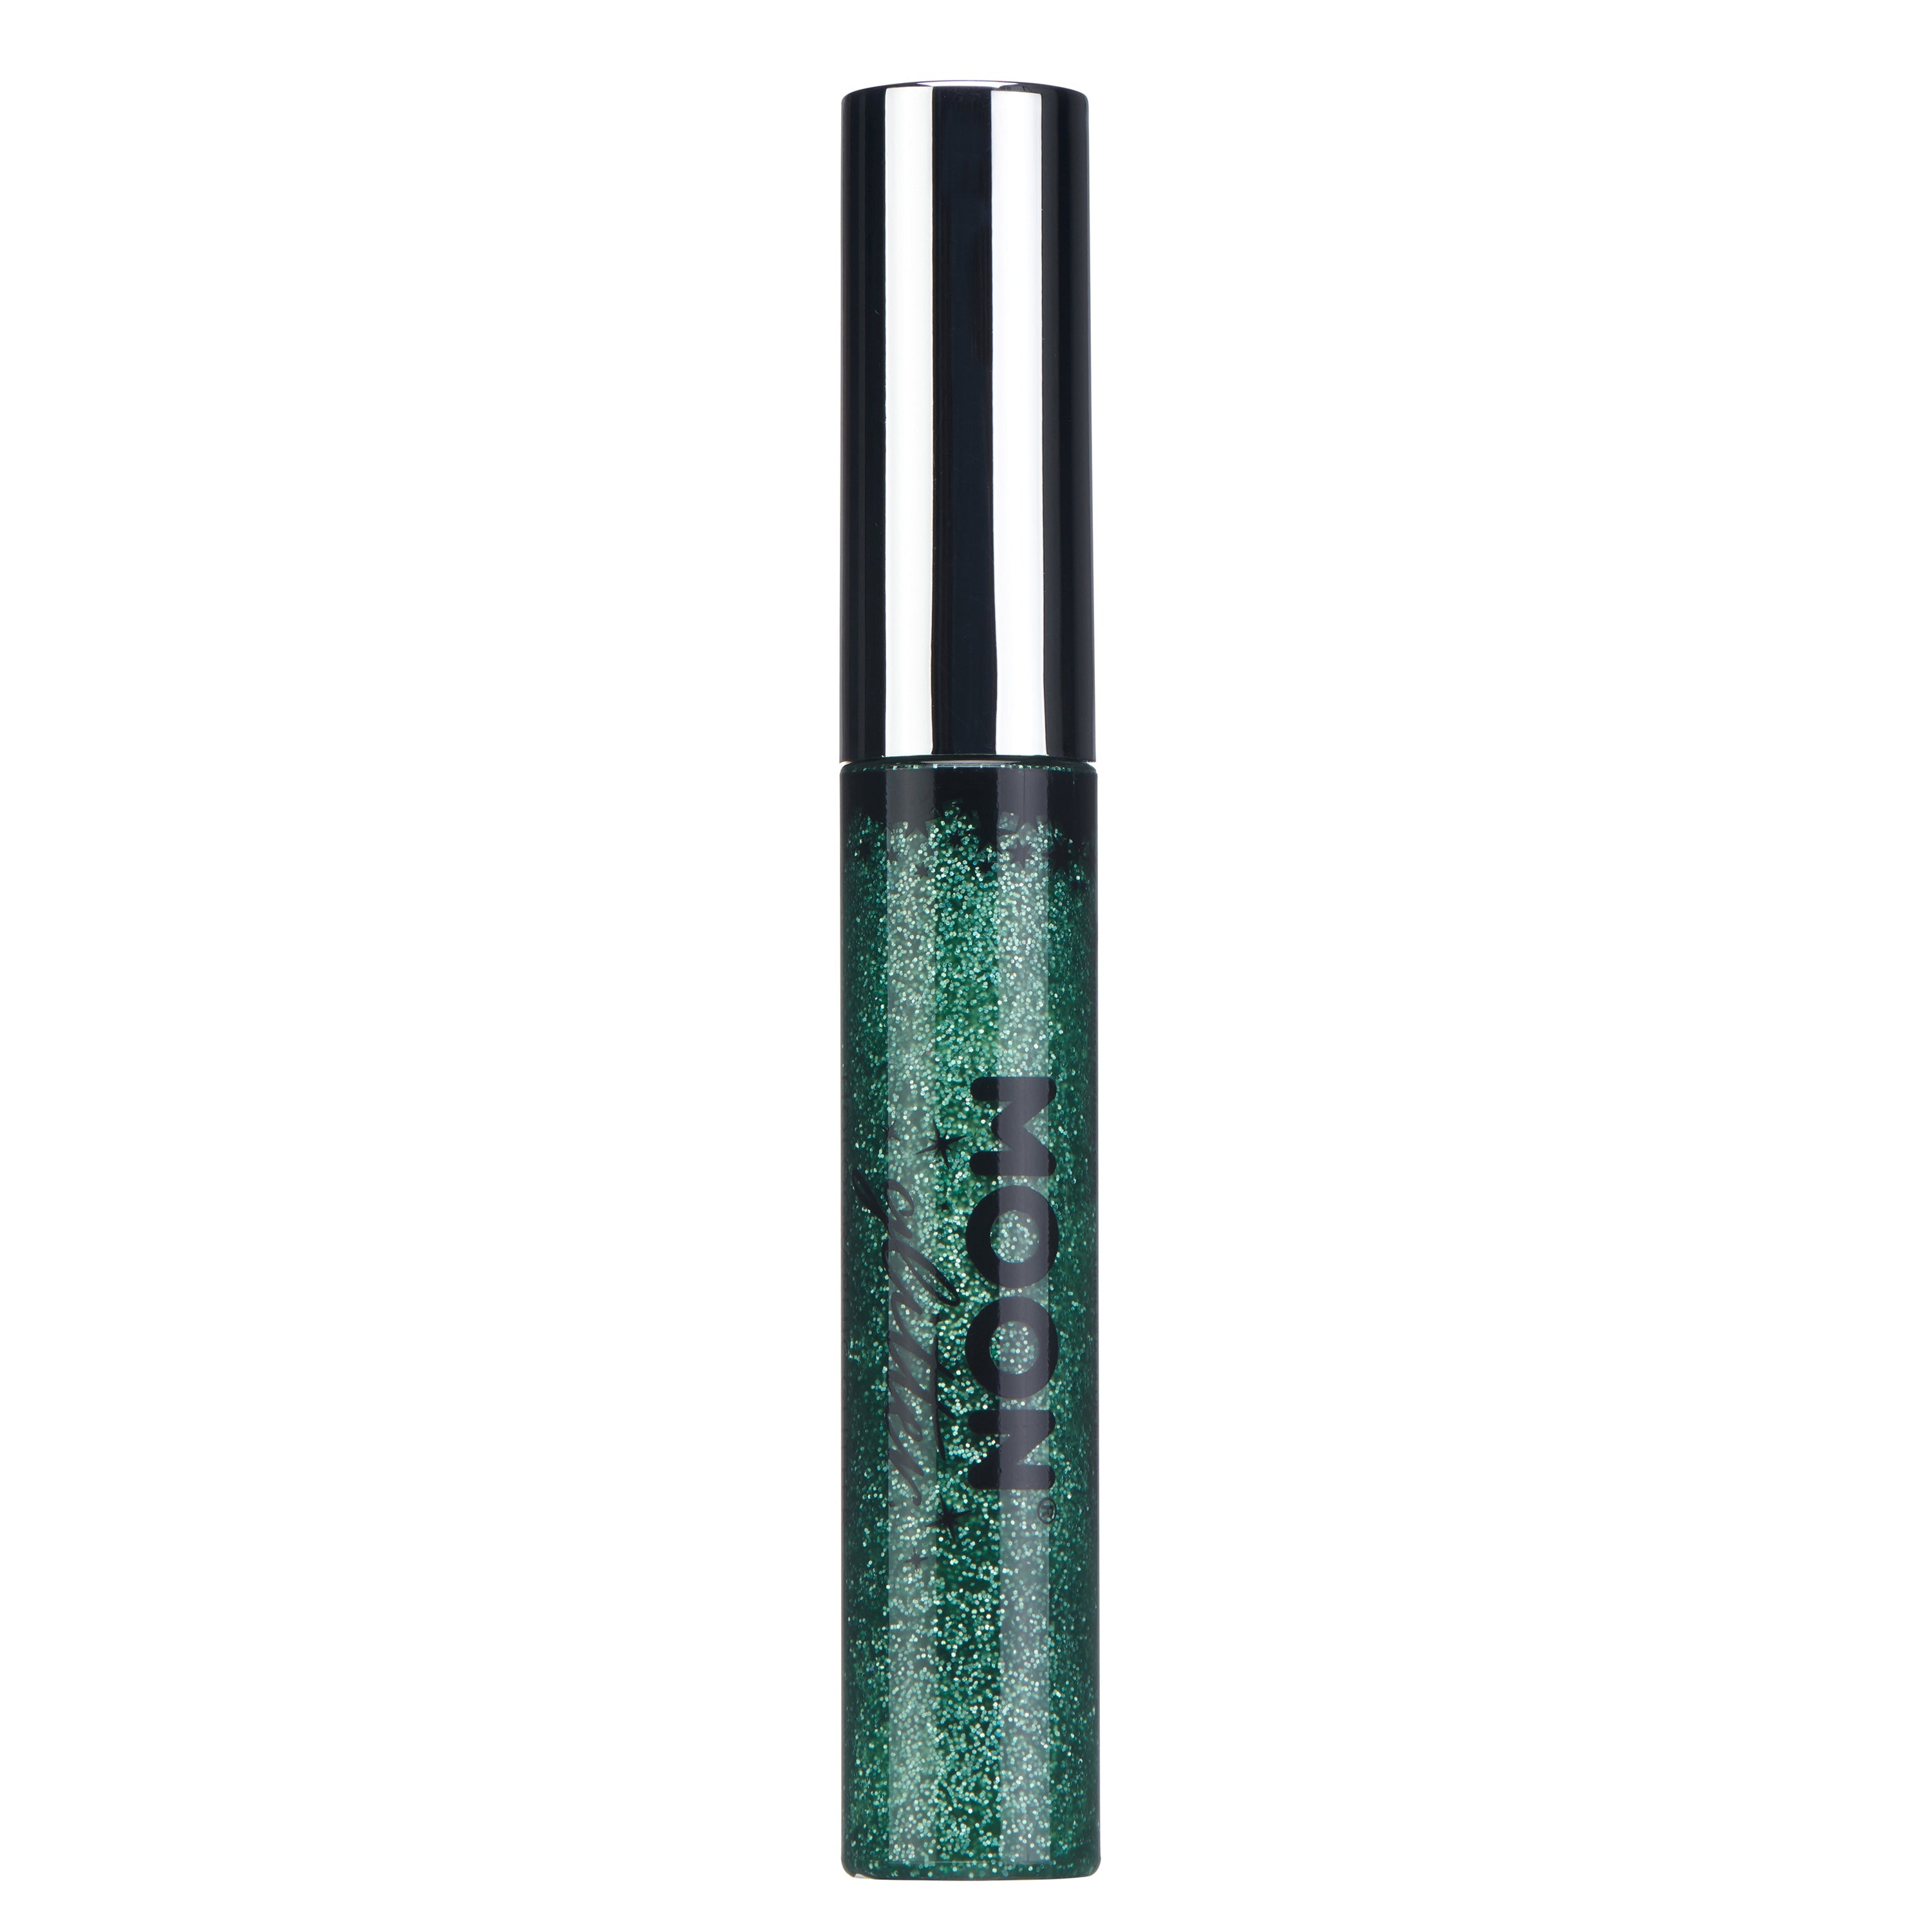 Green - Holographic Glitter Eyeliner, 10mL. Cosmetically certified, FDA & Health Canada compliant, cruelty free and vegan.